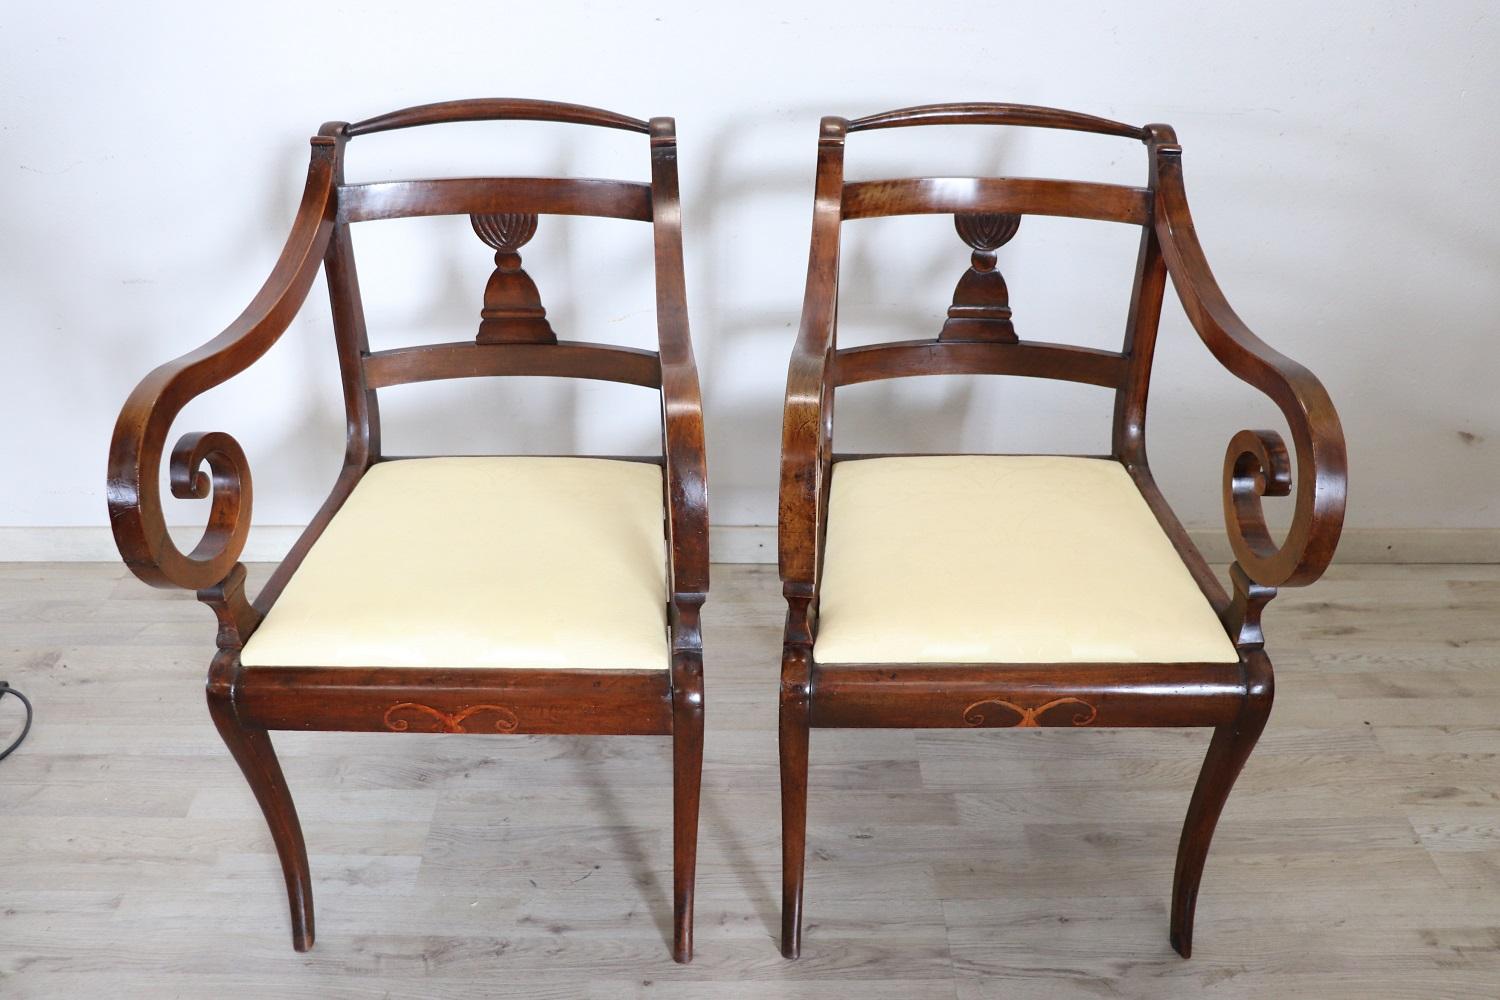 Lovely Italian antique armchairs, set of 2, 1800. These armchairs are of the period Empire in solid walnut wood. The seat Upholstered in fabric. Beautiful swirl armrests. This beautiful armchairs has an enveloping shape and a comfortable seat. Good